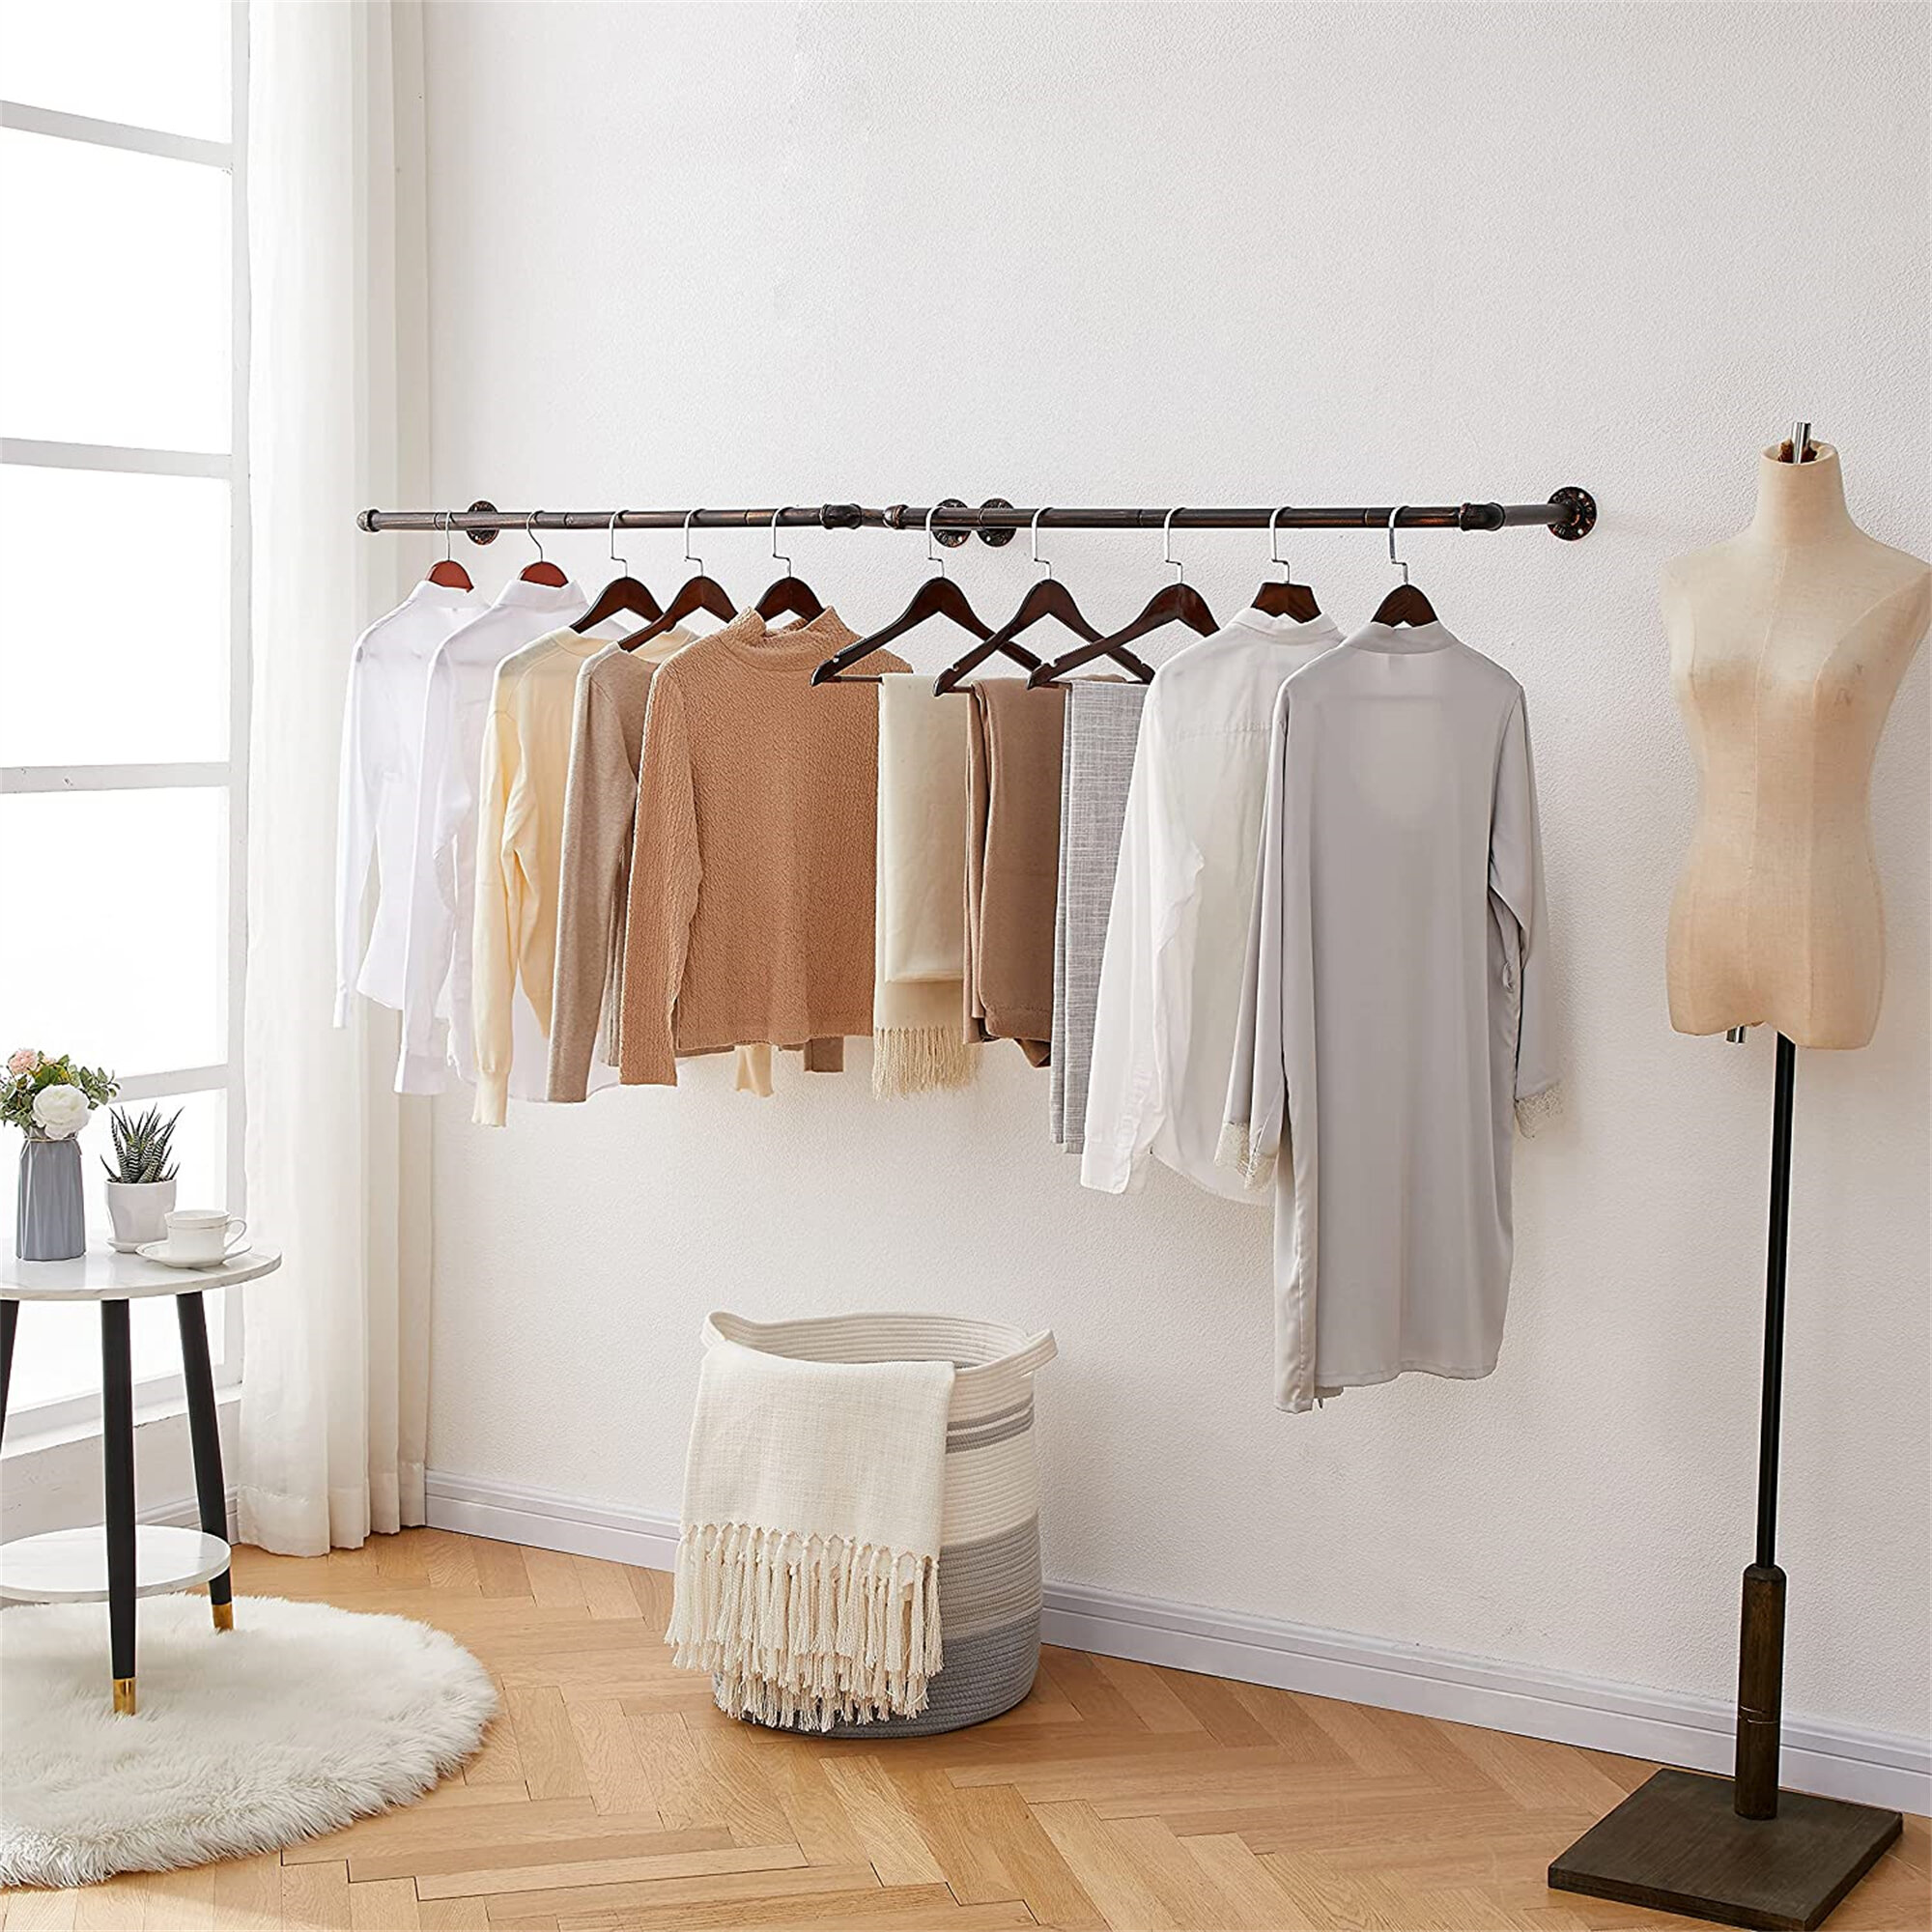 Minimalistic Clothes Rack Garment Rail made of metal mounted on the ceiling Ceiling Clothing rack